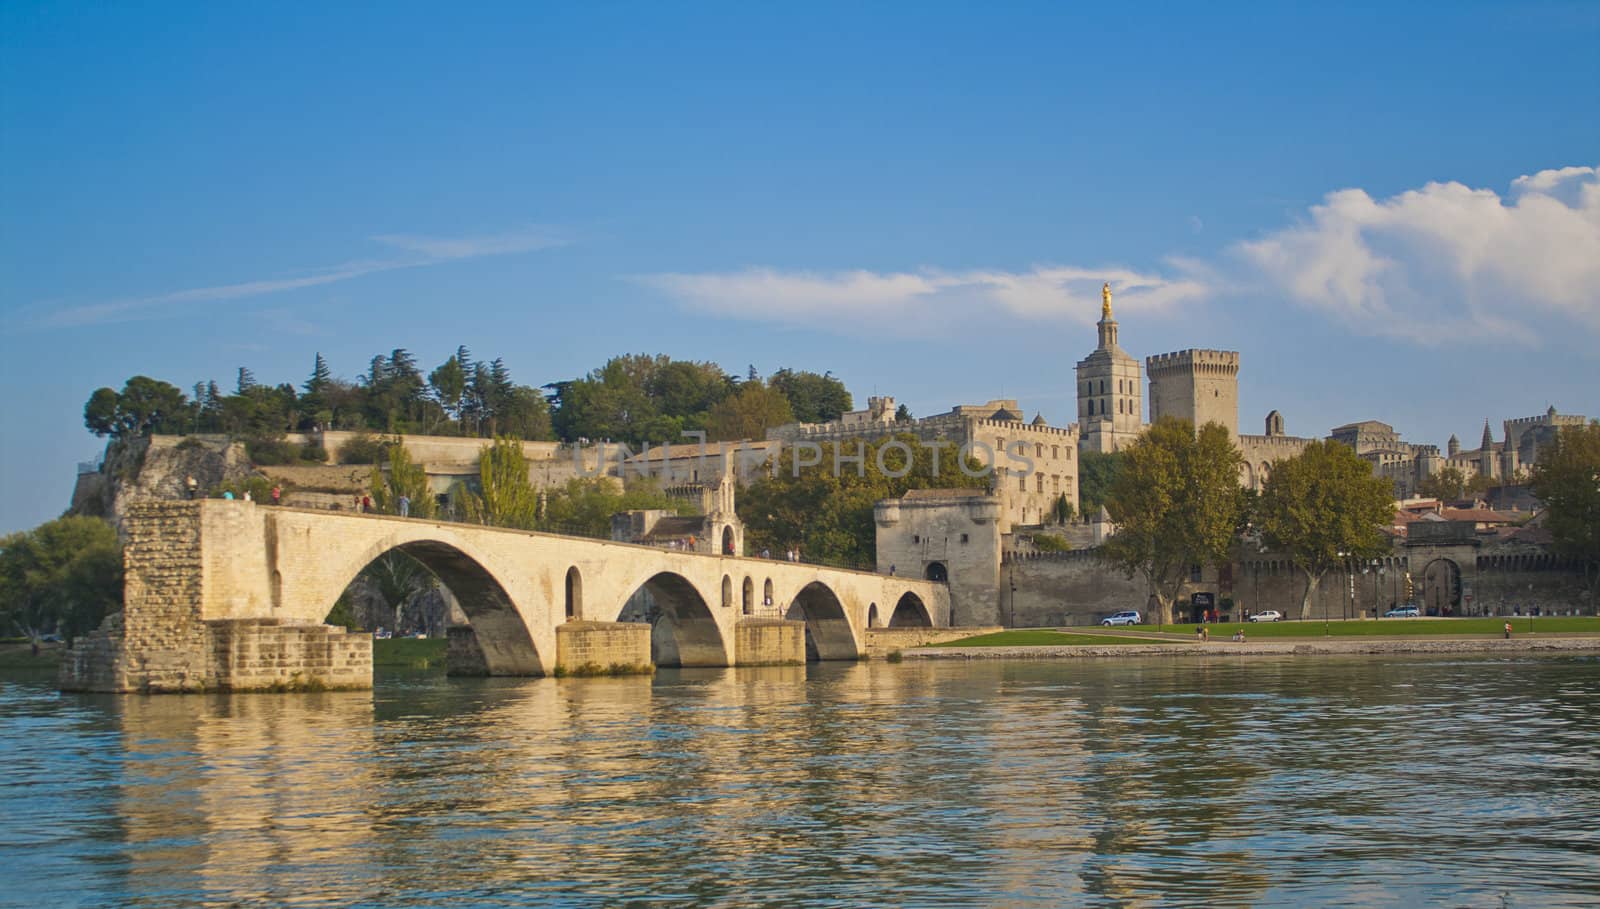 View of the bridge of Avignon and the Pope Palace in the background.







View over the bridge of Avignon with the Pope Palace in the background.